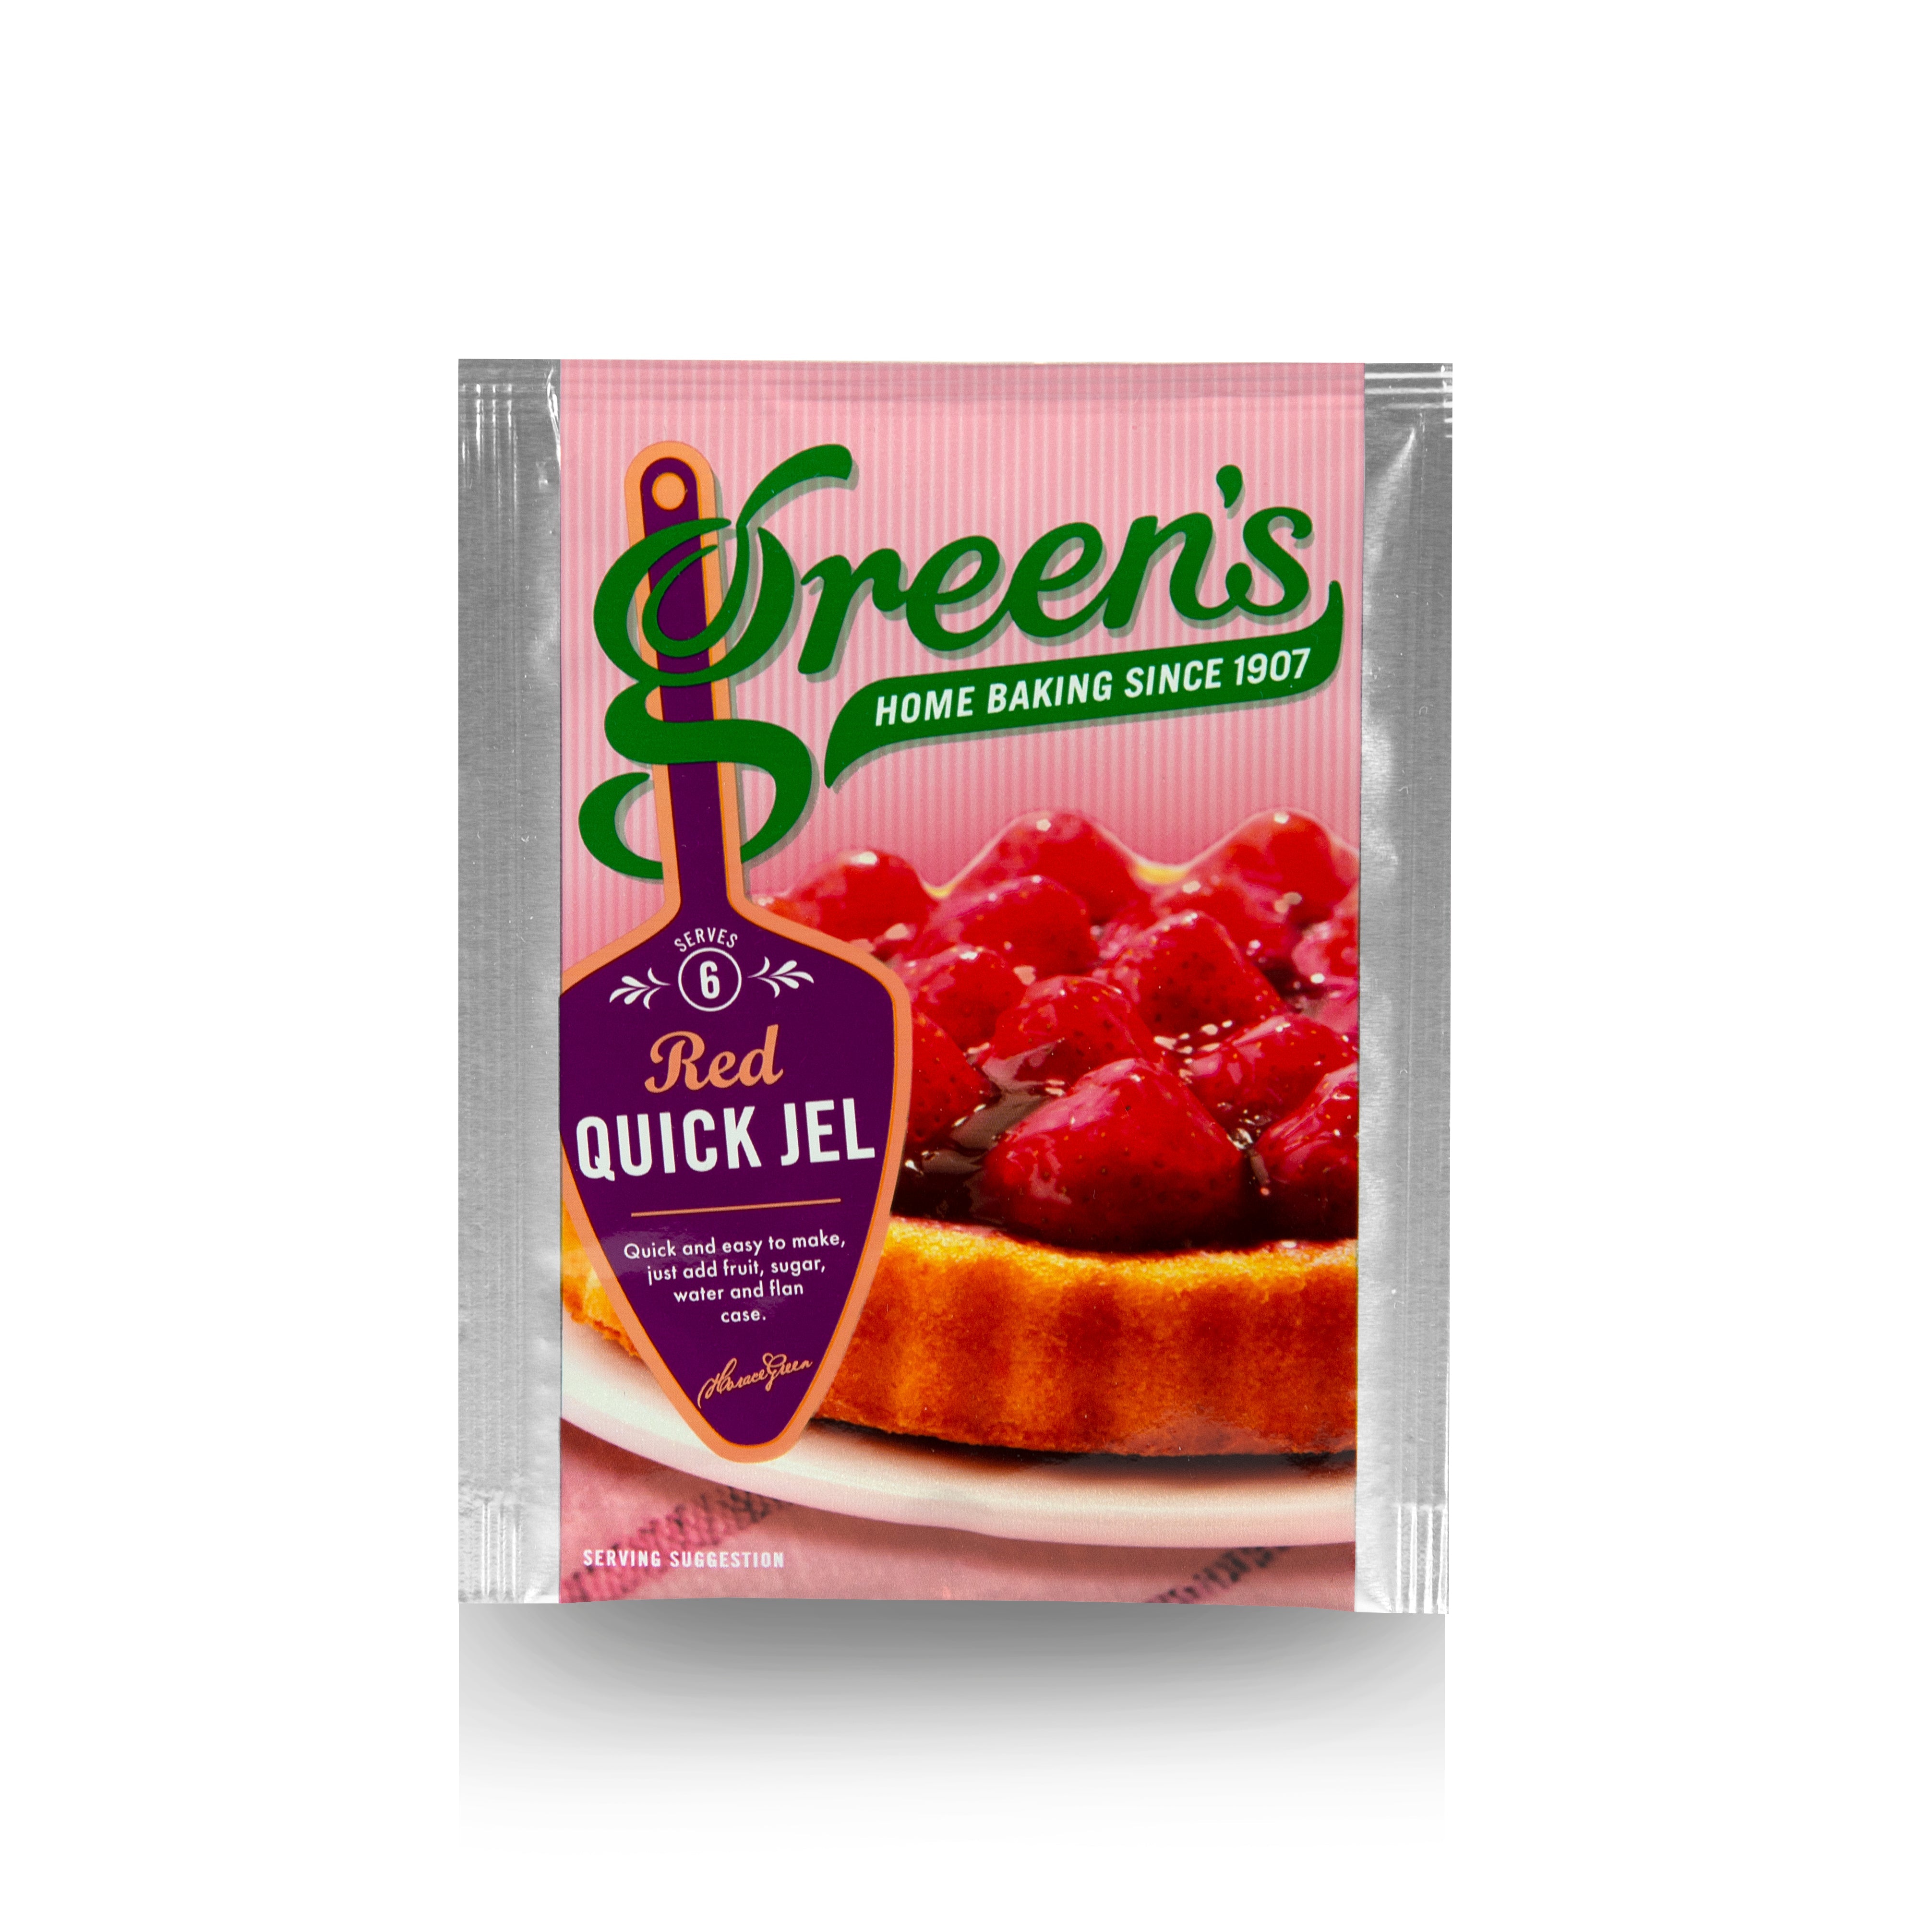 Green's Red Quick Jel Mix 35g - Pack of 24